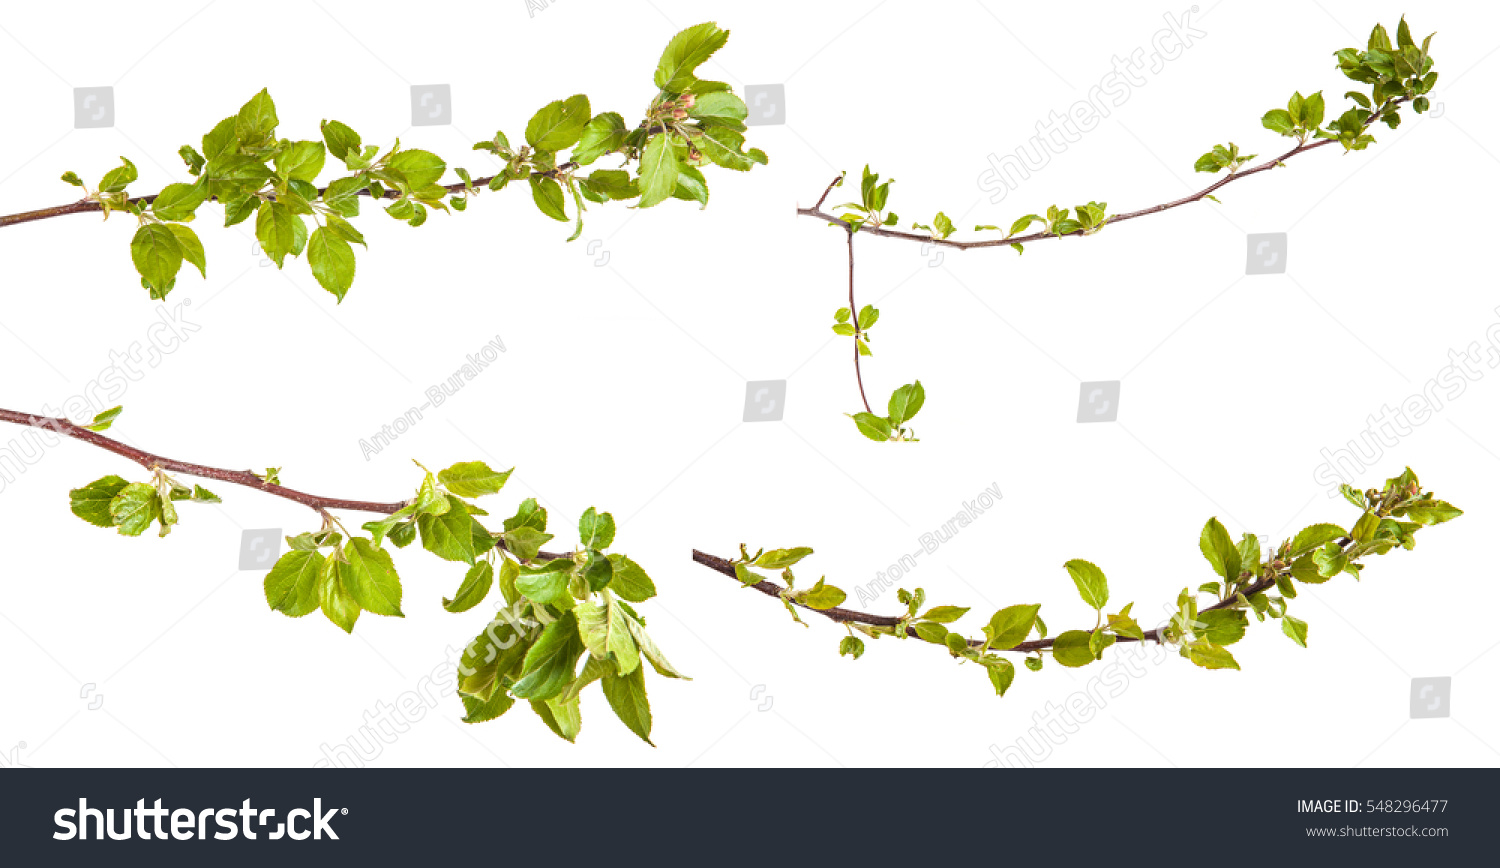 branches of apple trees with young leaves. isolated on white background #548296477